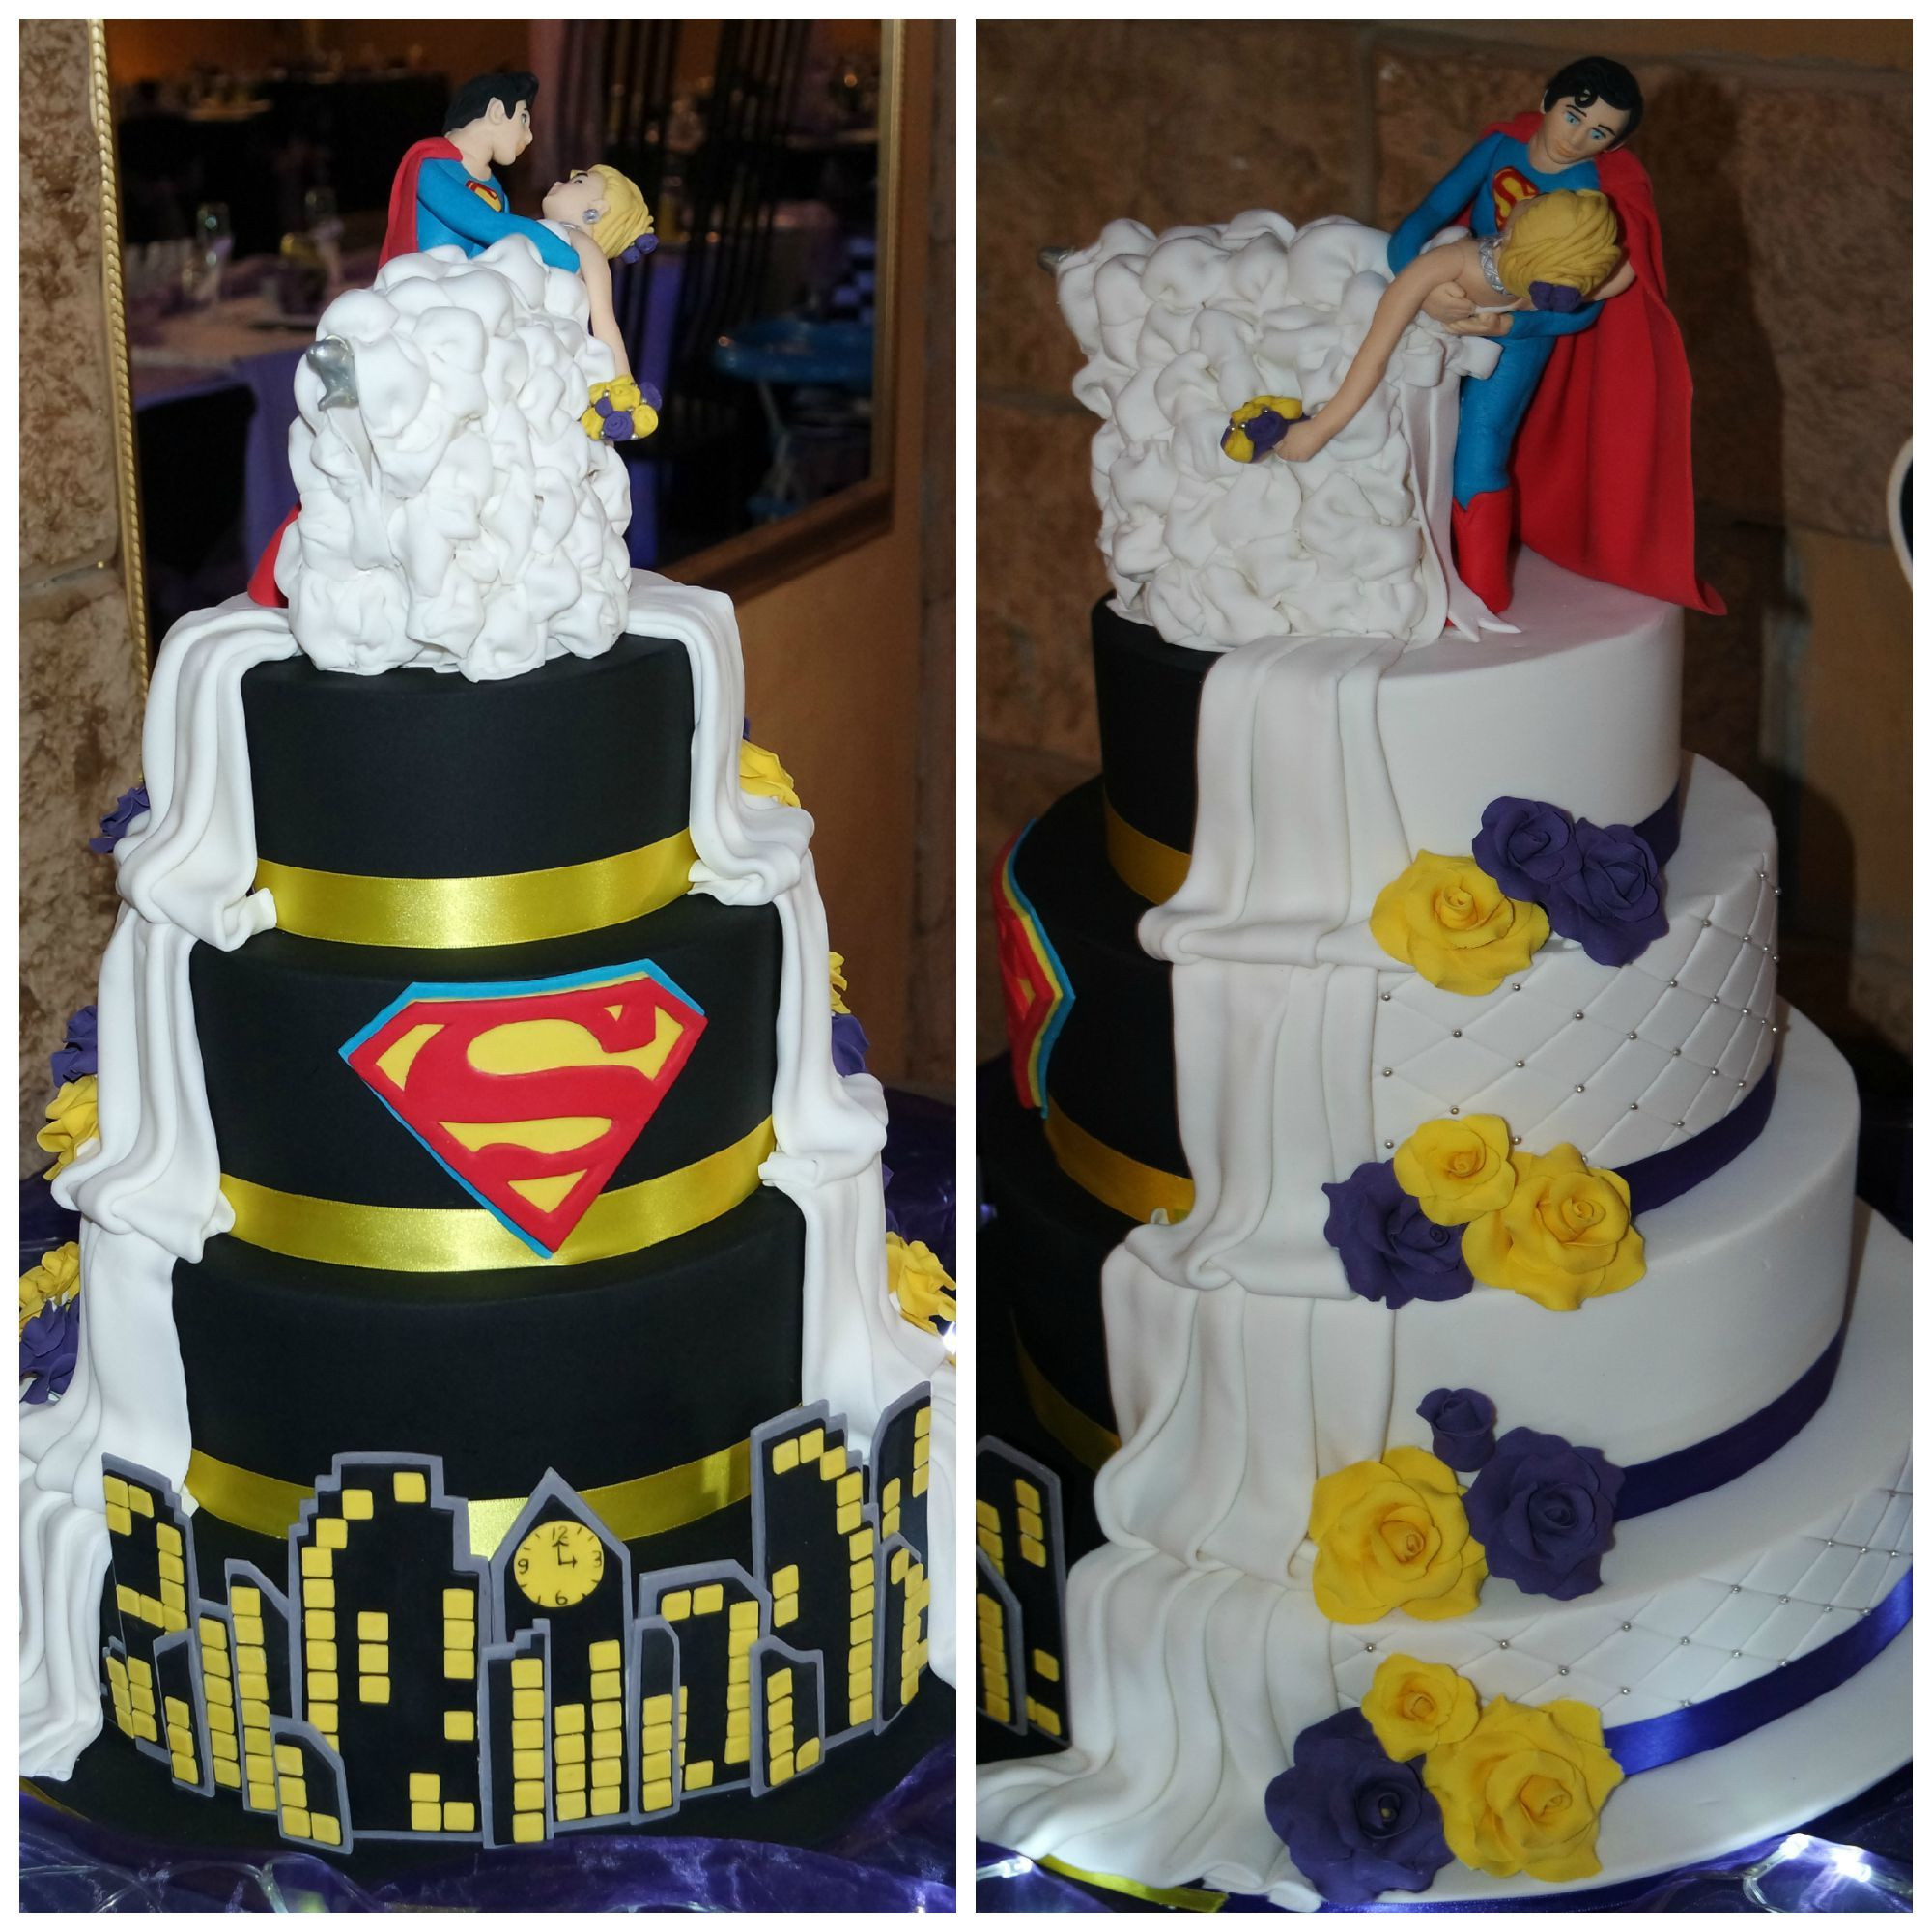 Superman Wedding Cakes
 Superman Wedding Cake Made by Maggie Gagiano Cakes